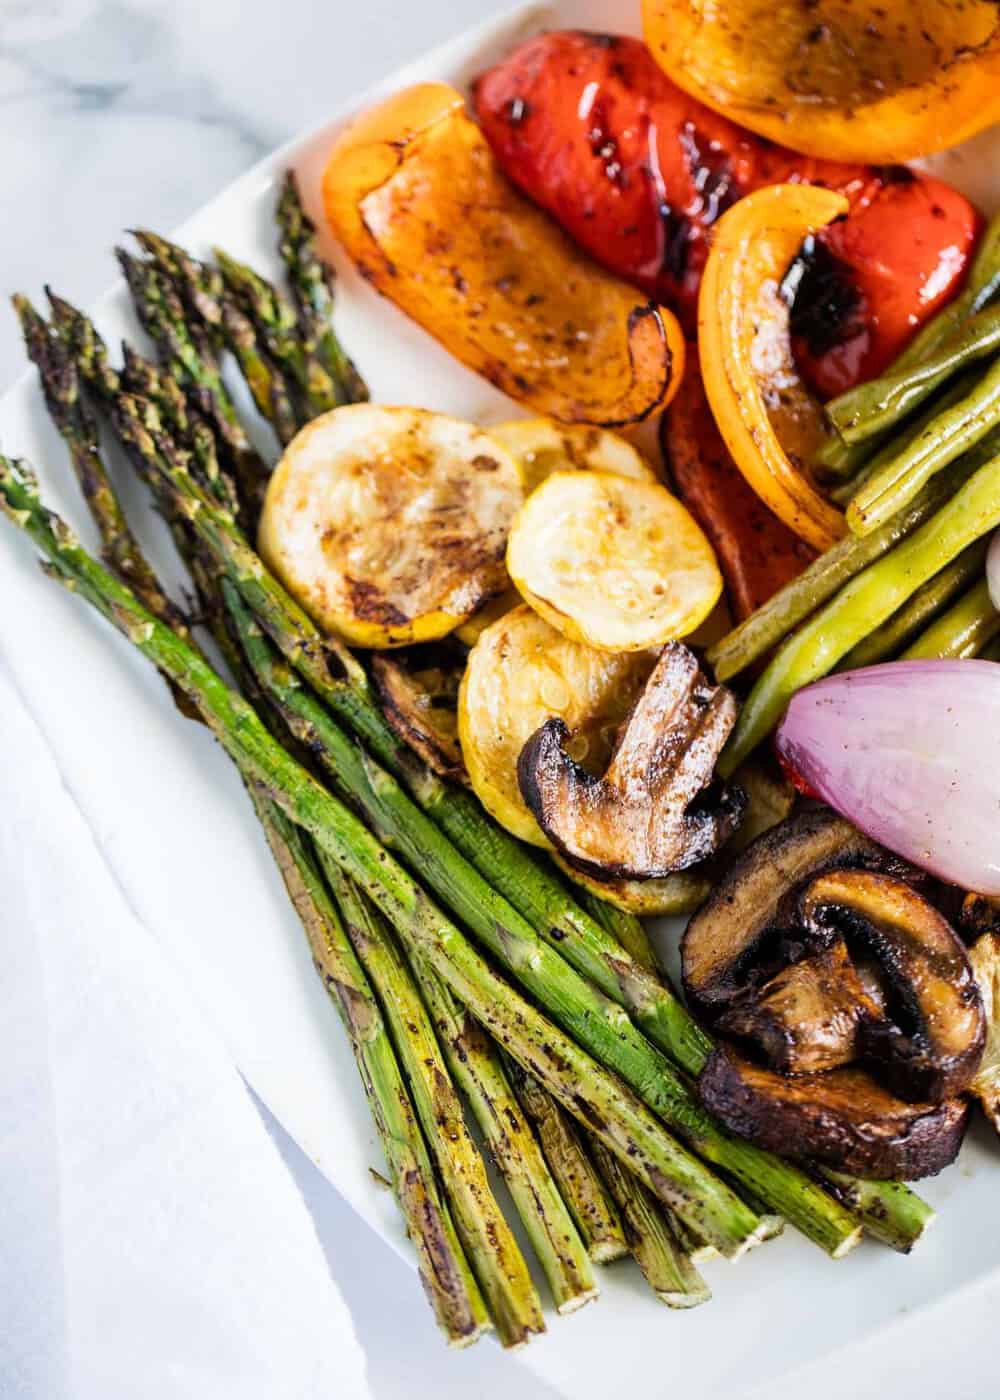 Grilled asparagus, mushrooms, squash, green beans and bell peppers.